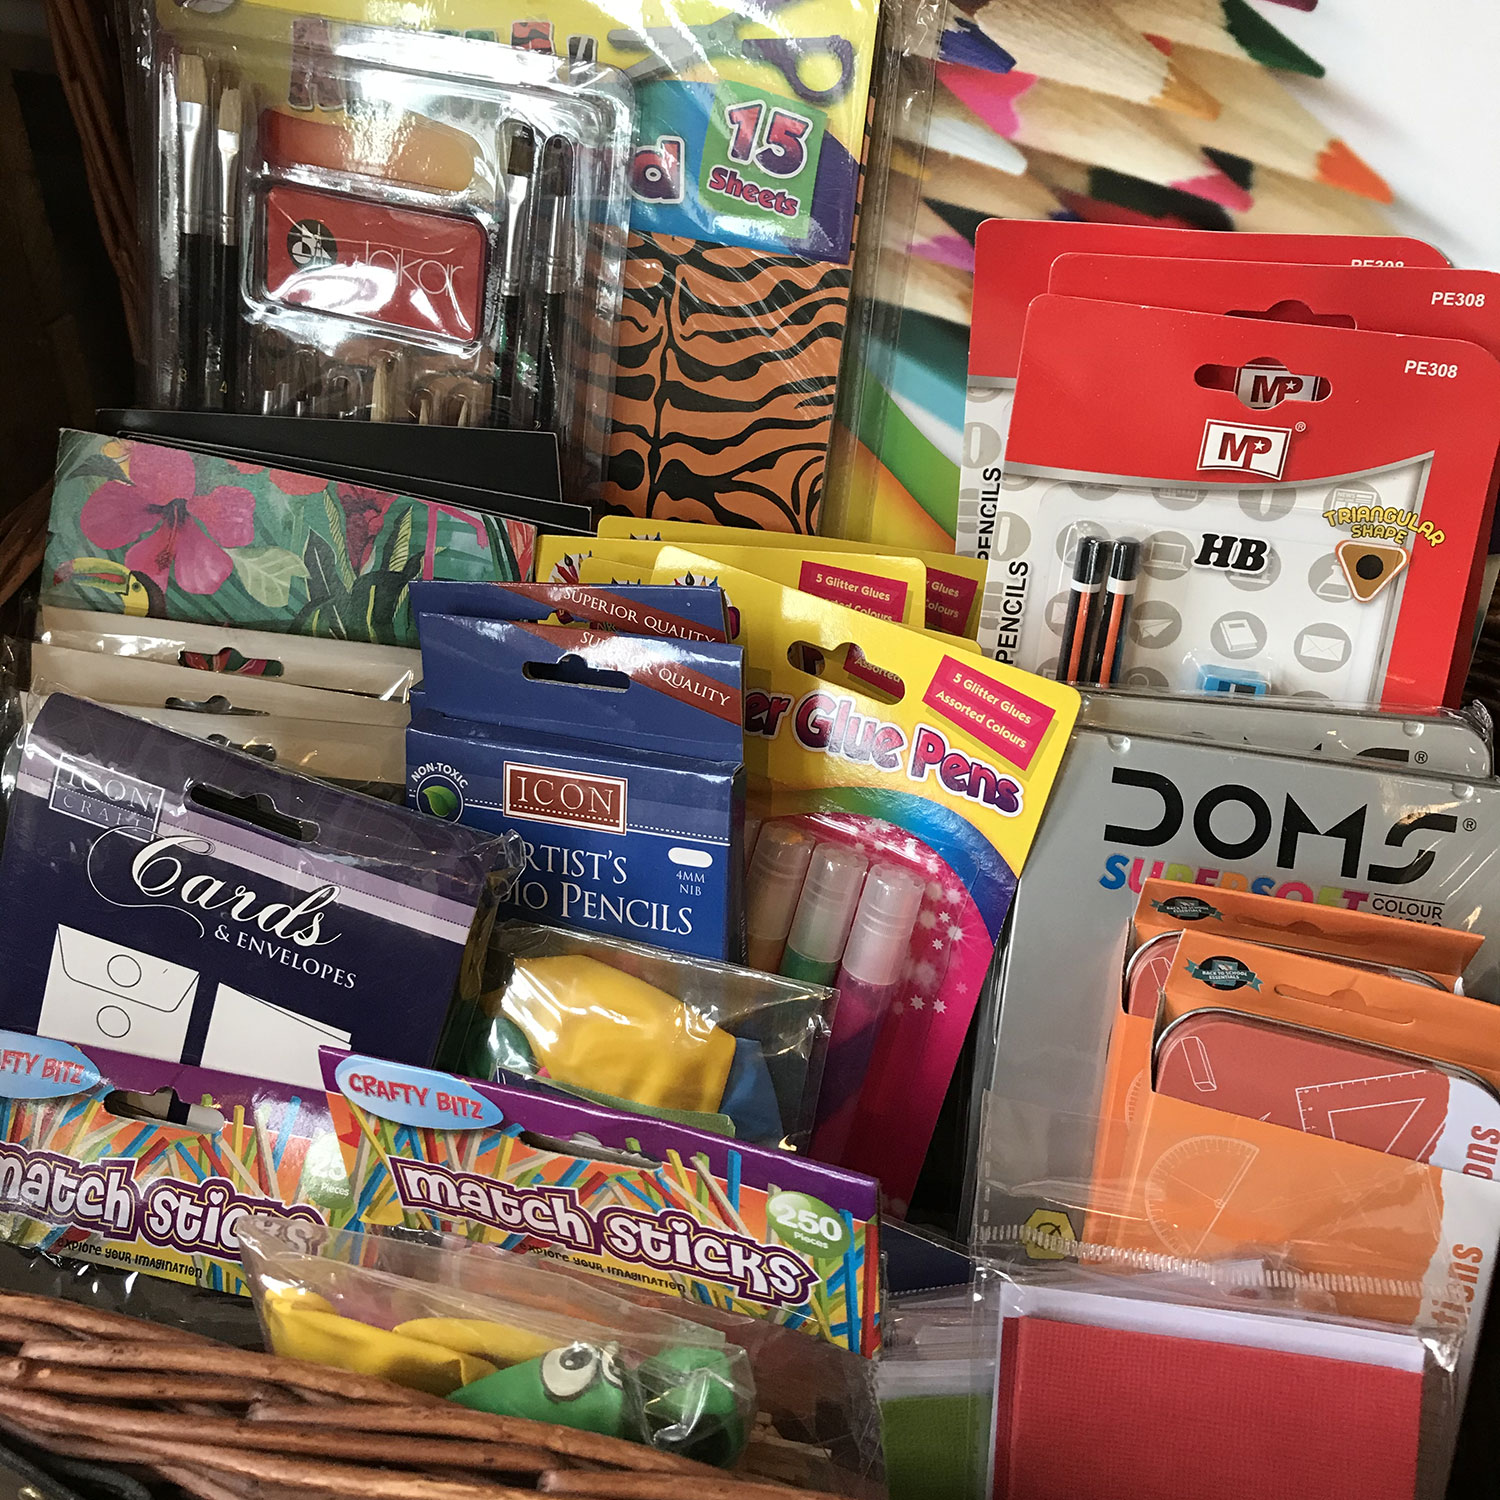 Our stationary area also includes a wide selection of craft materials - anything you might need to keep kids entertained on a rainy afternoon!